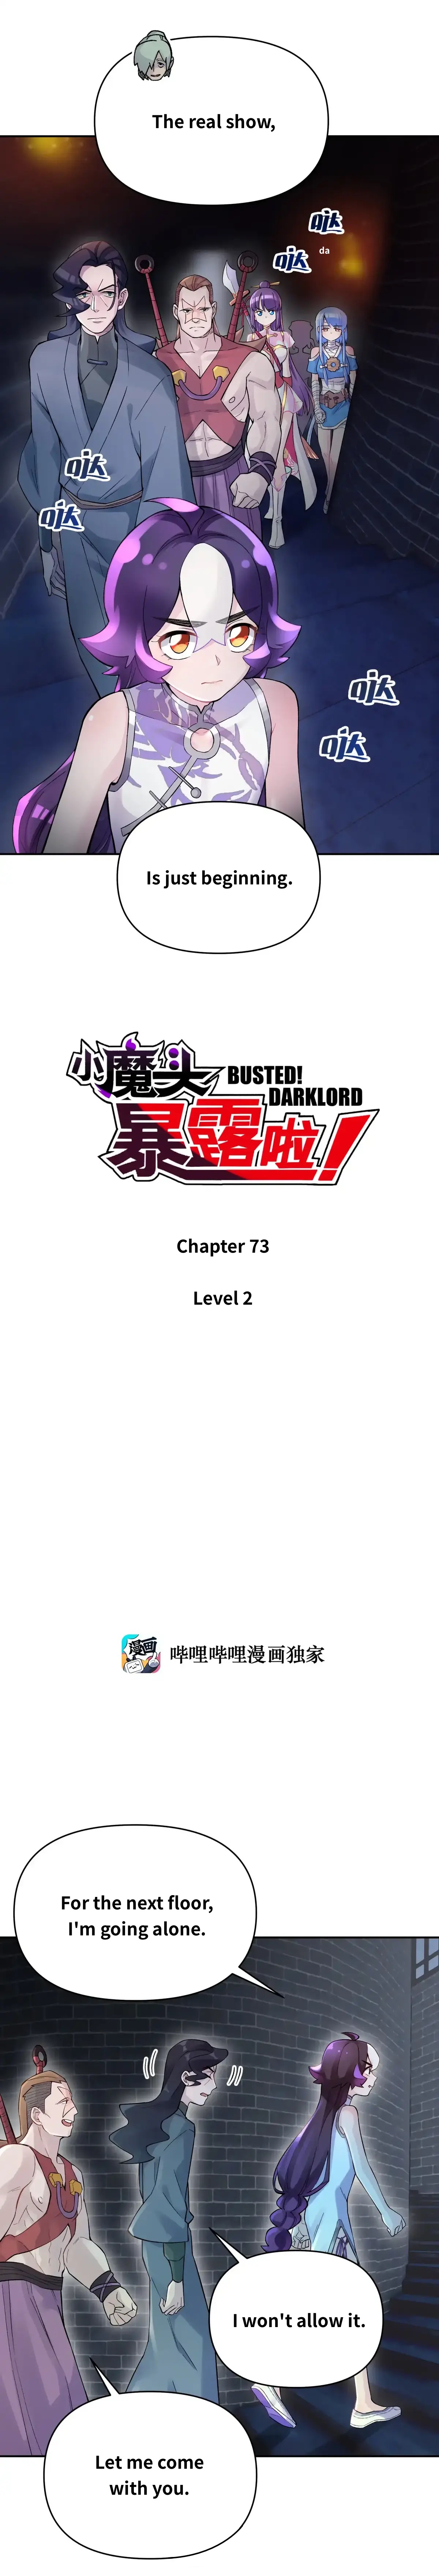 Busted! Darklord Chapter 73: Level 2 - Picture 2